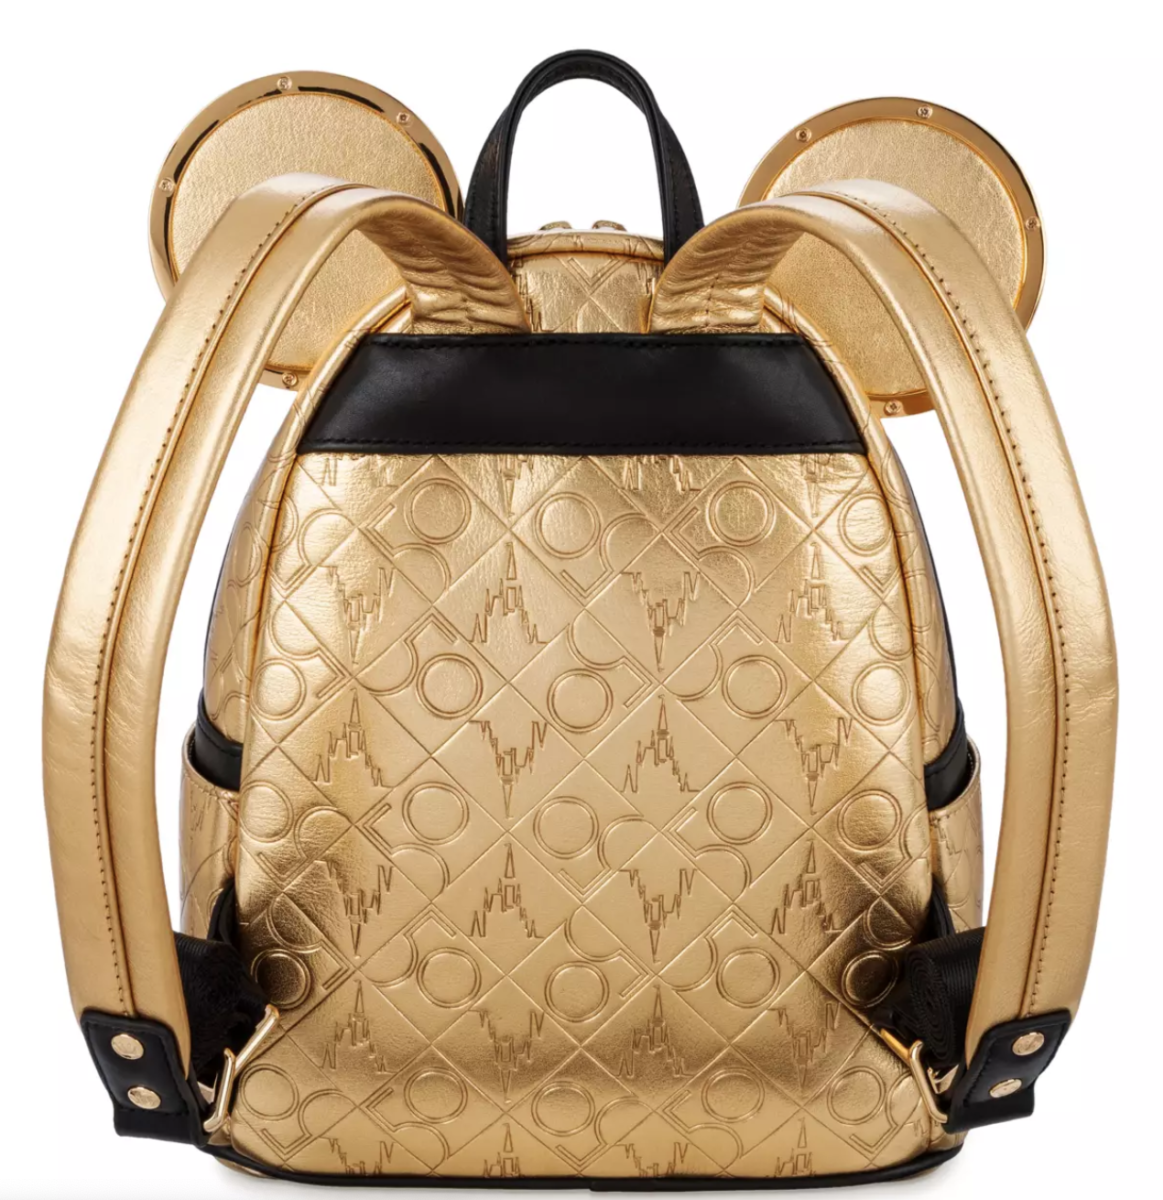 50th-luxe-logo-backpack-9-50-07-am-2849095